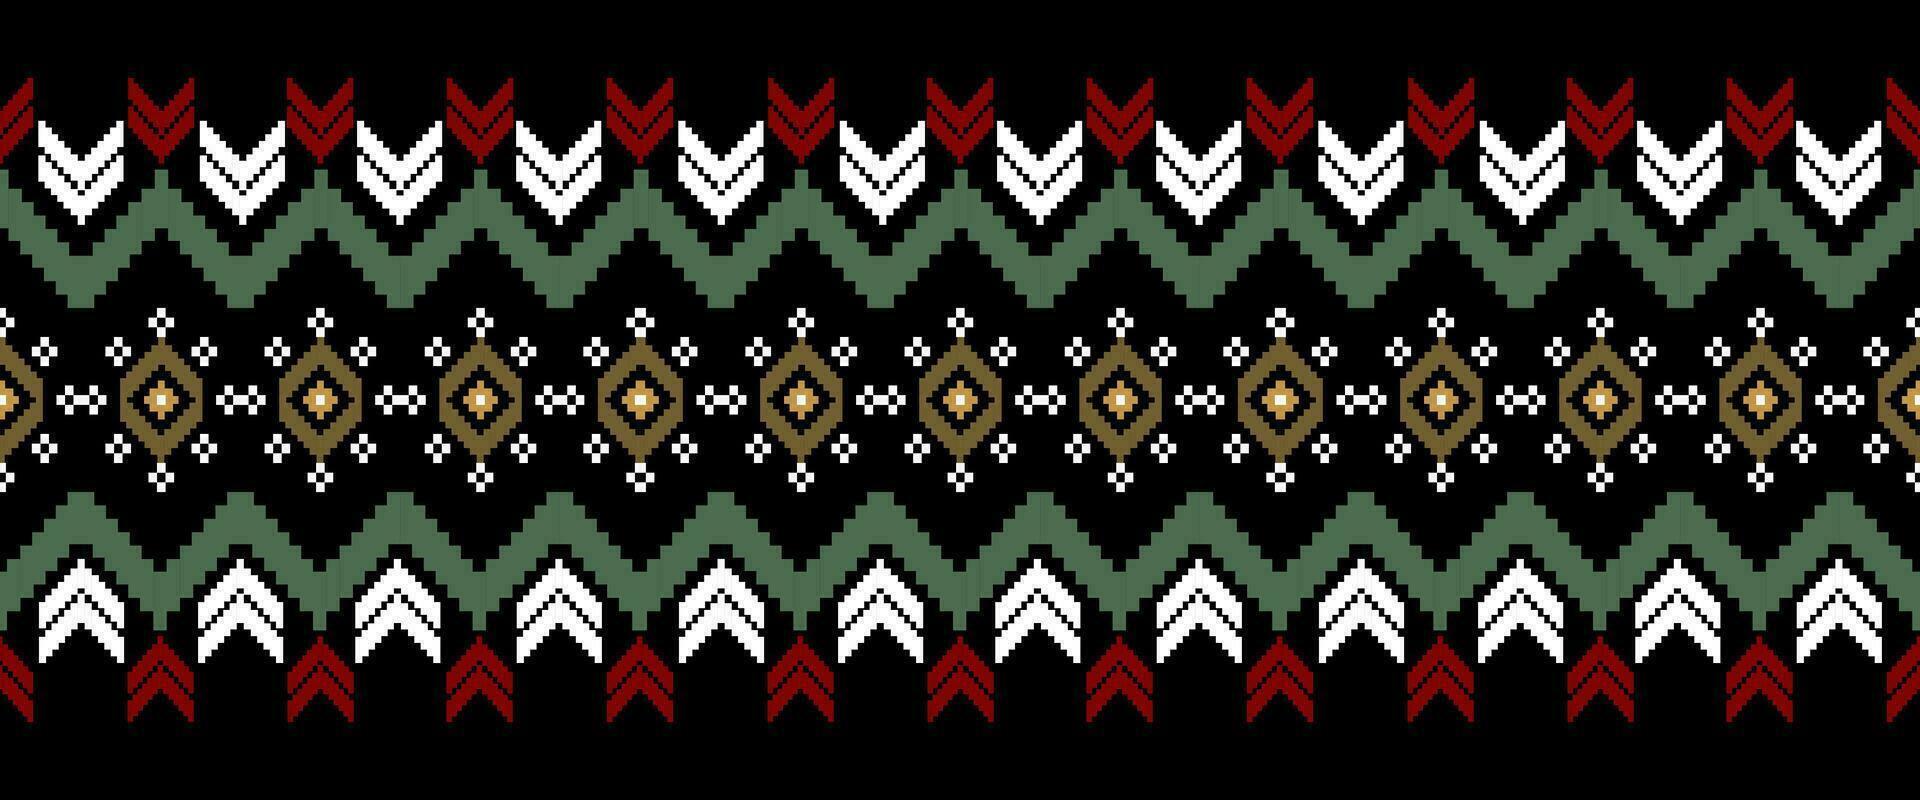 Cross-stitch. Ethnic patterns. indian geometric pattern Indigenous pattern. Black background. Print fabric, textile, clothing, knitwear. vector